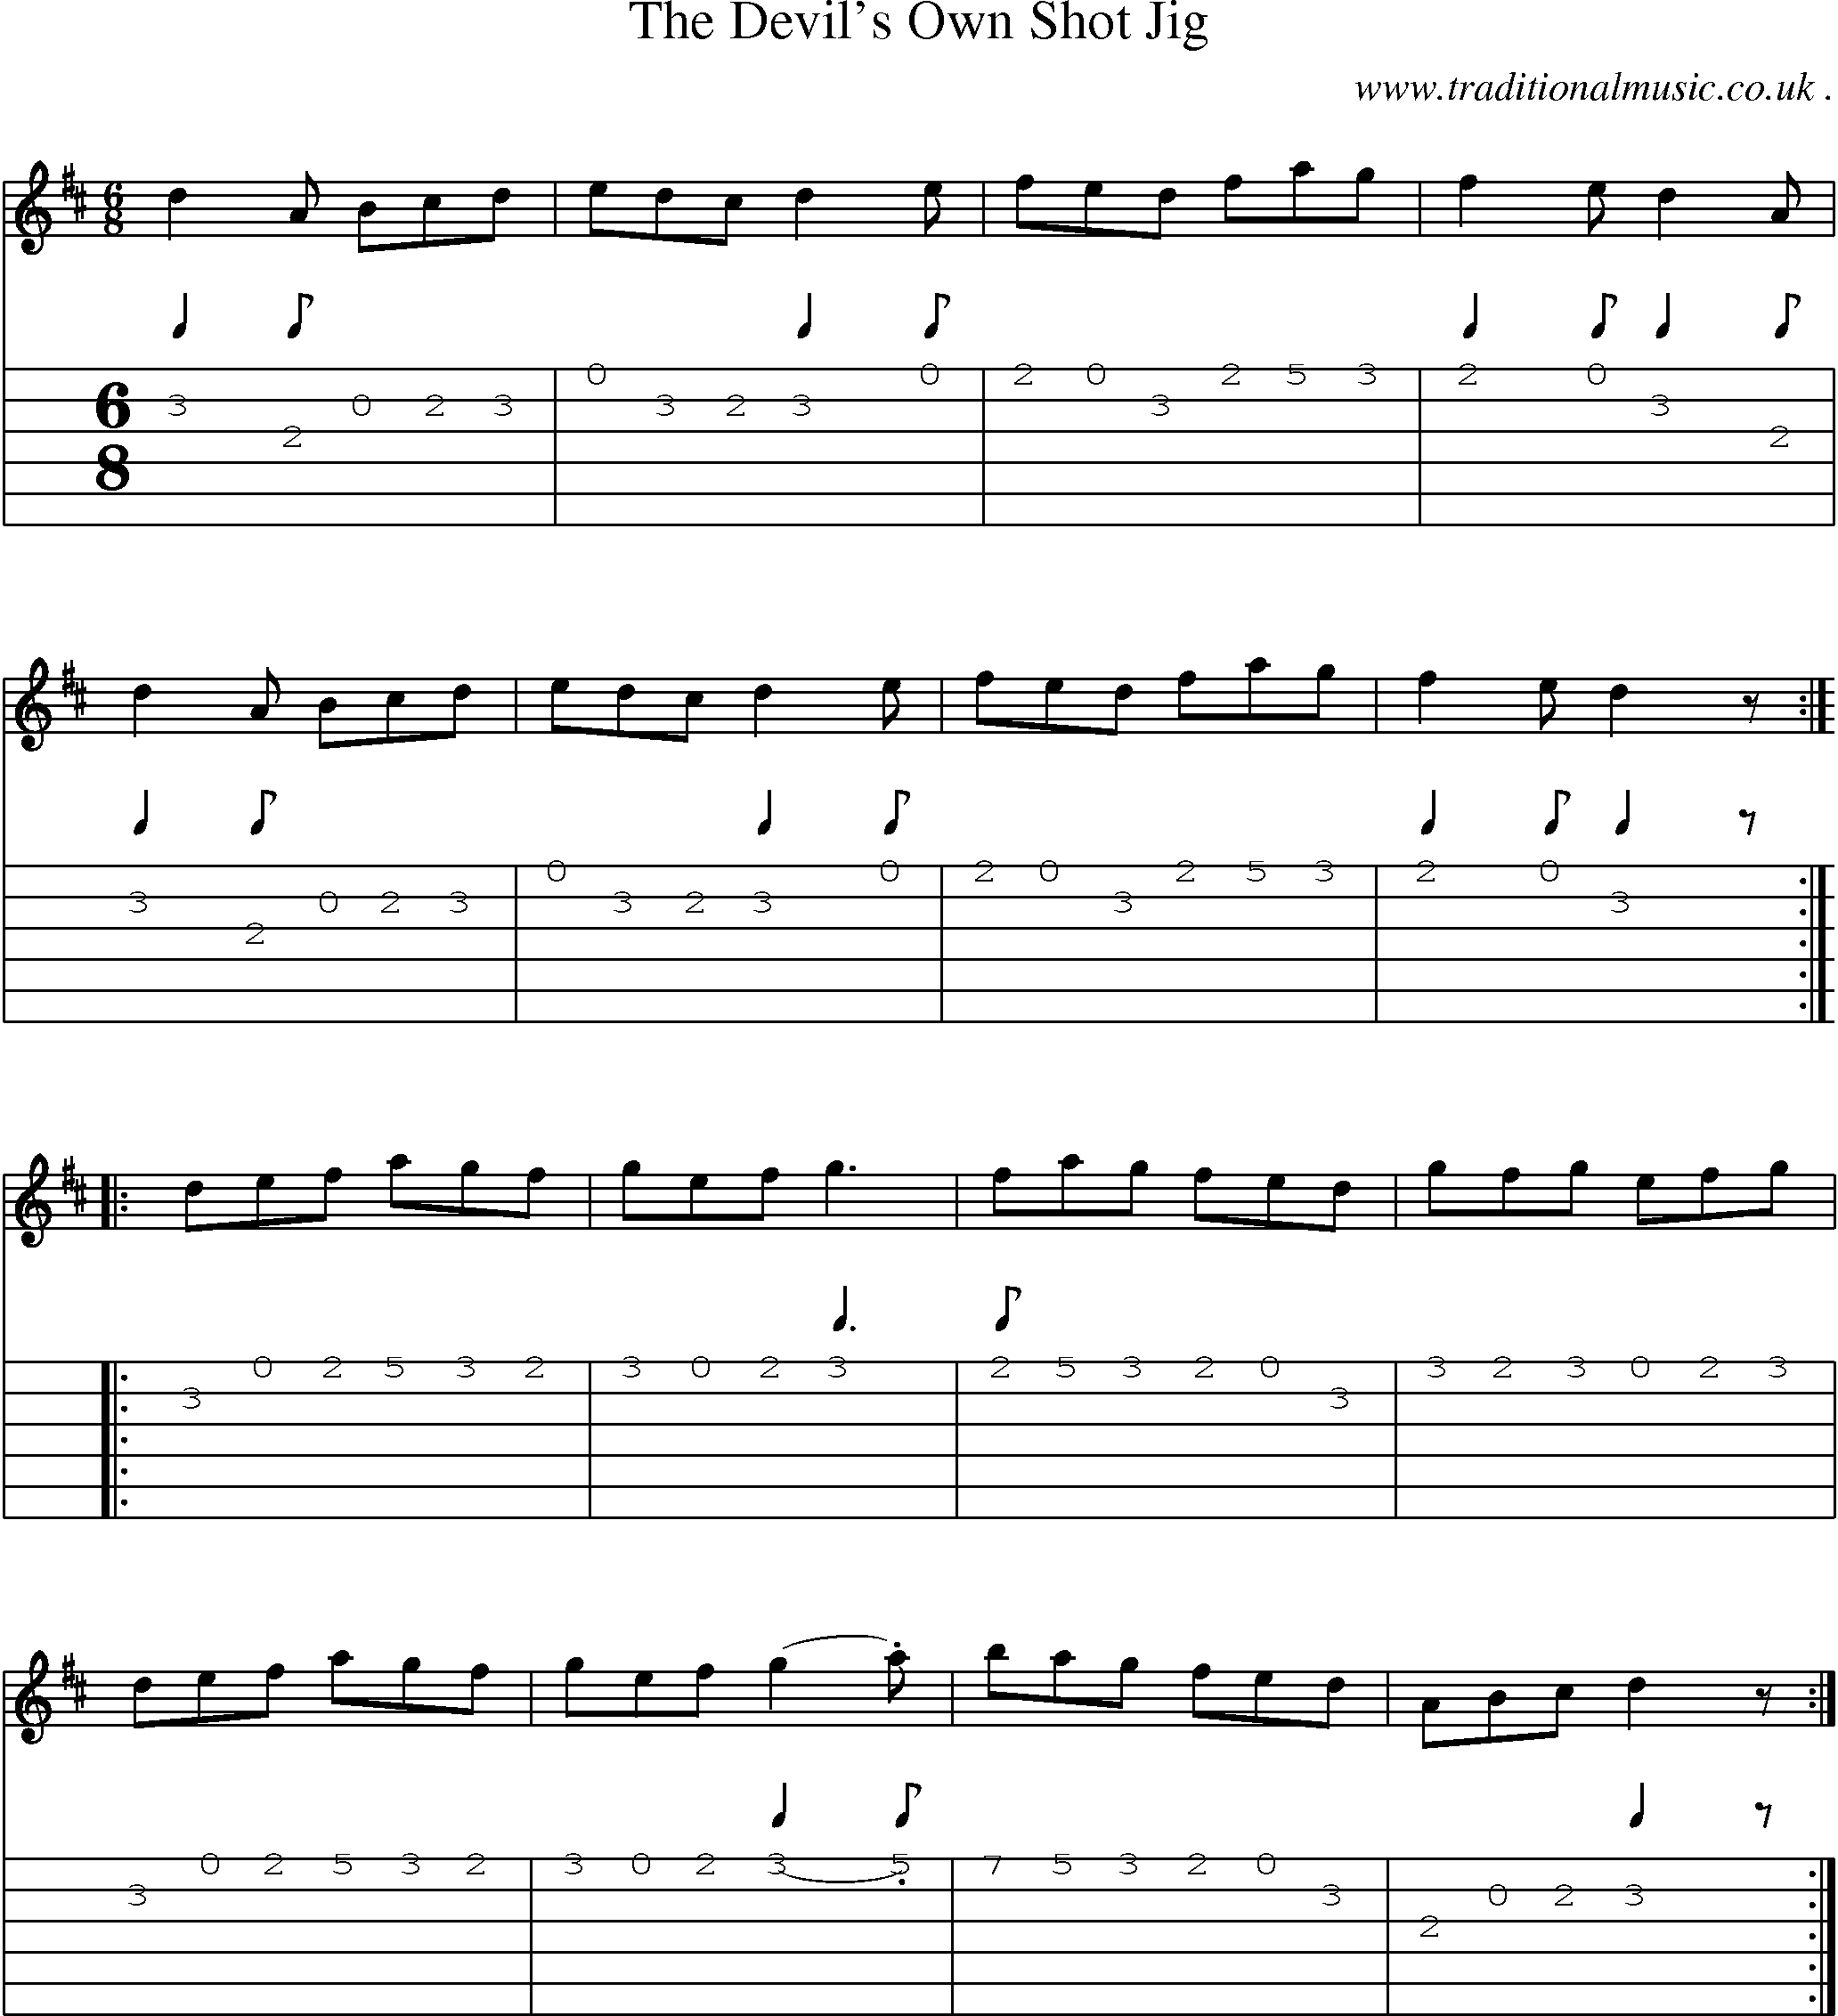 Sheet-Music and Guitar Tabs for The Devils Own Shot Jig